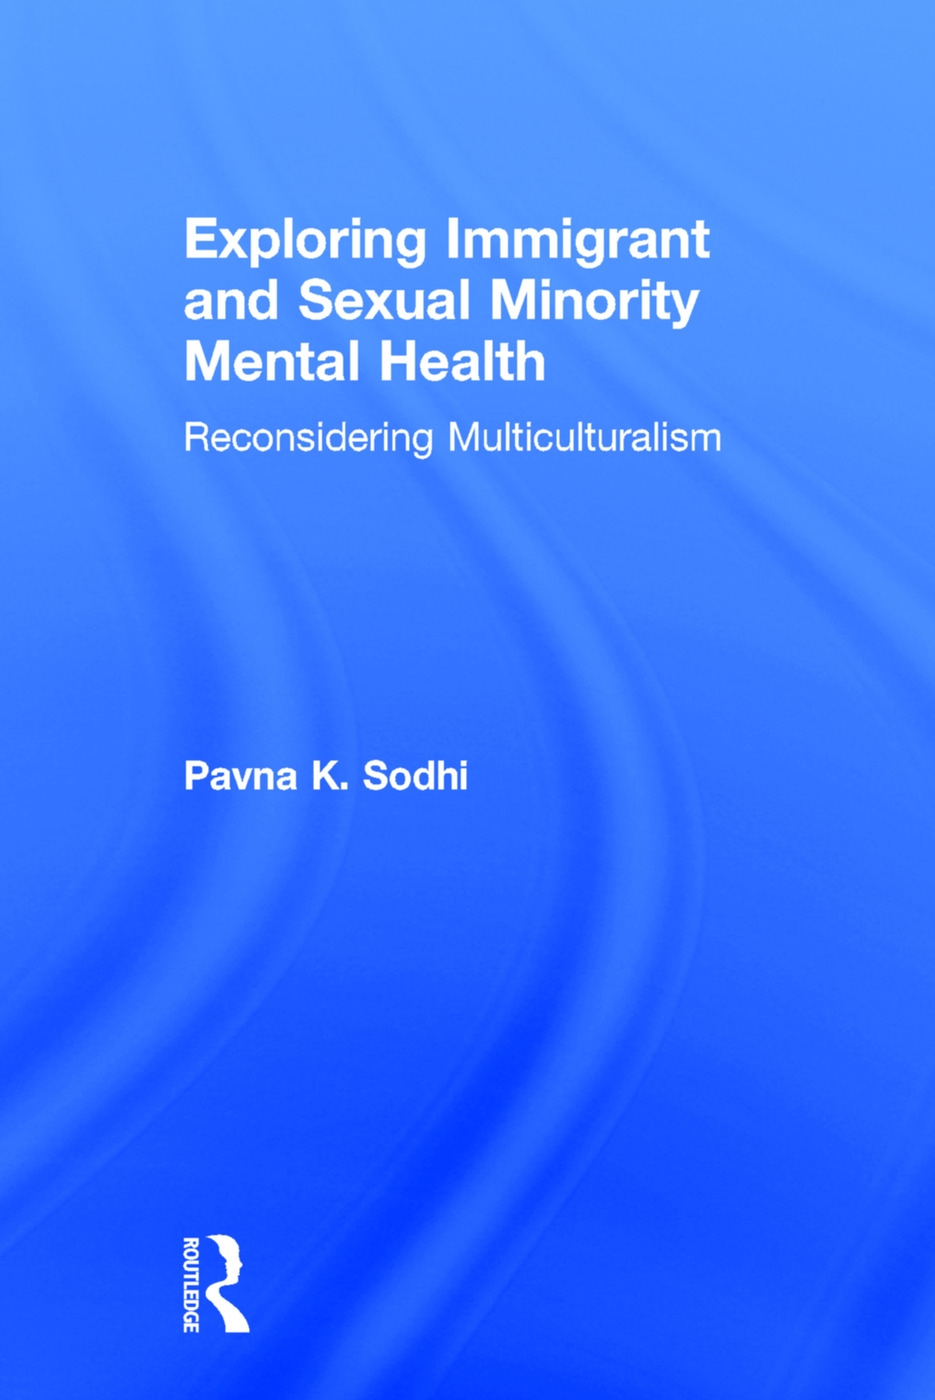 Exploring Immigrant and Sexual Minority Mental Health: Reconsidering Multiculturalism